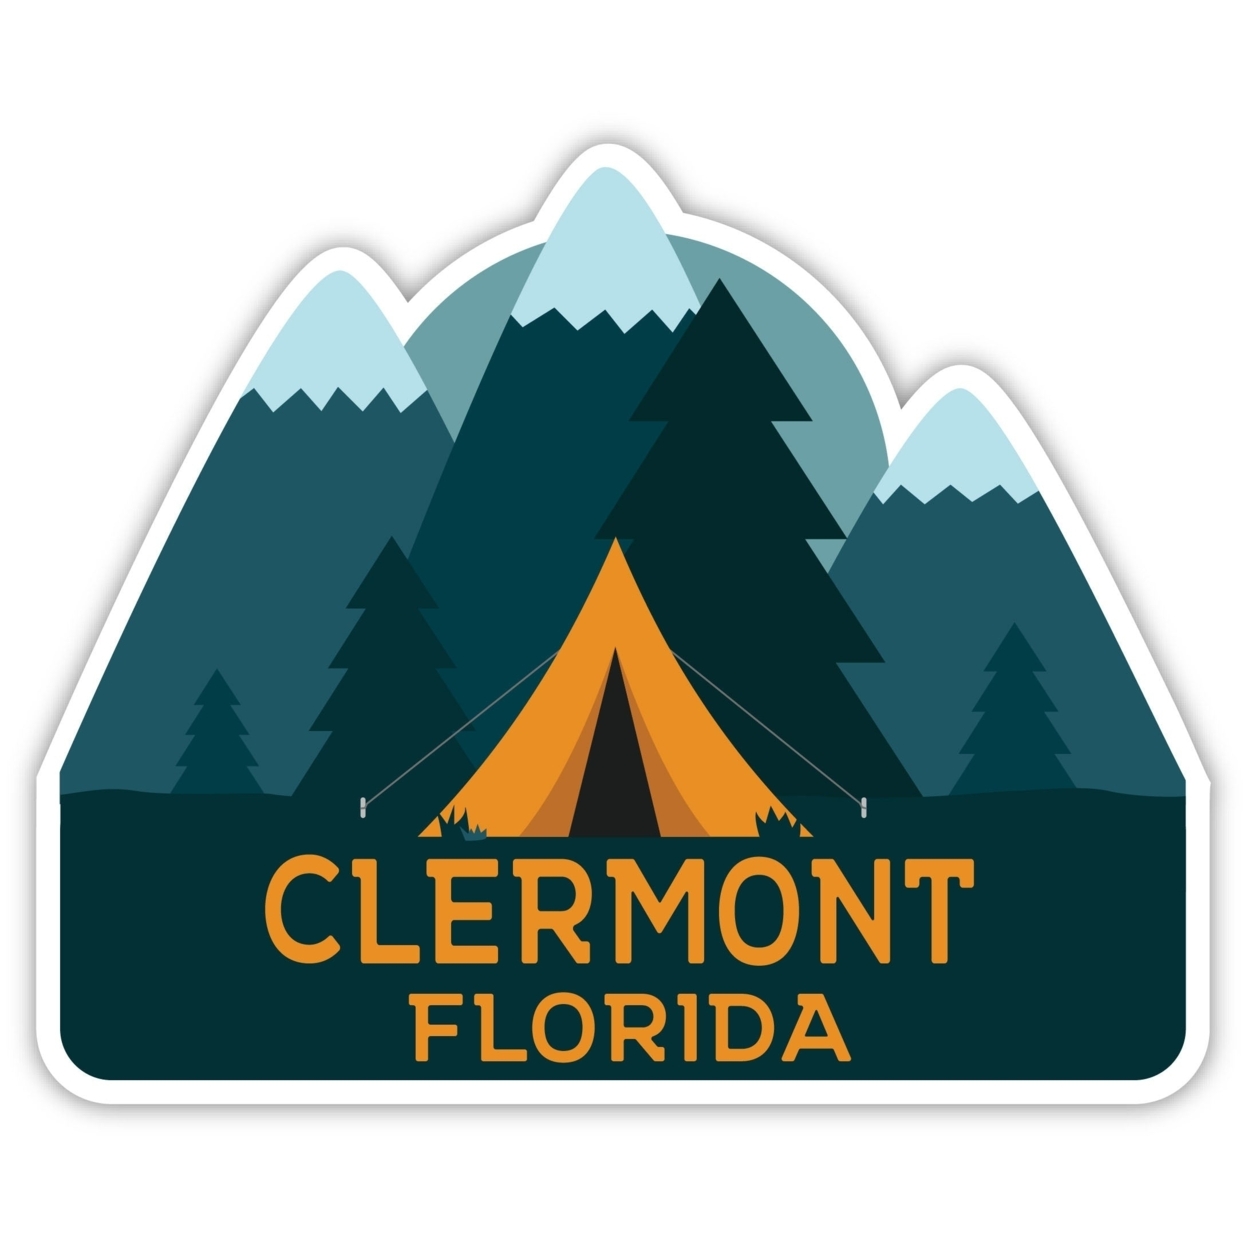 Clermont Florida Souvenir Decorative Stickers (Choose Theme And Size) - 4-Pack, 10-Inch, Tent